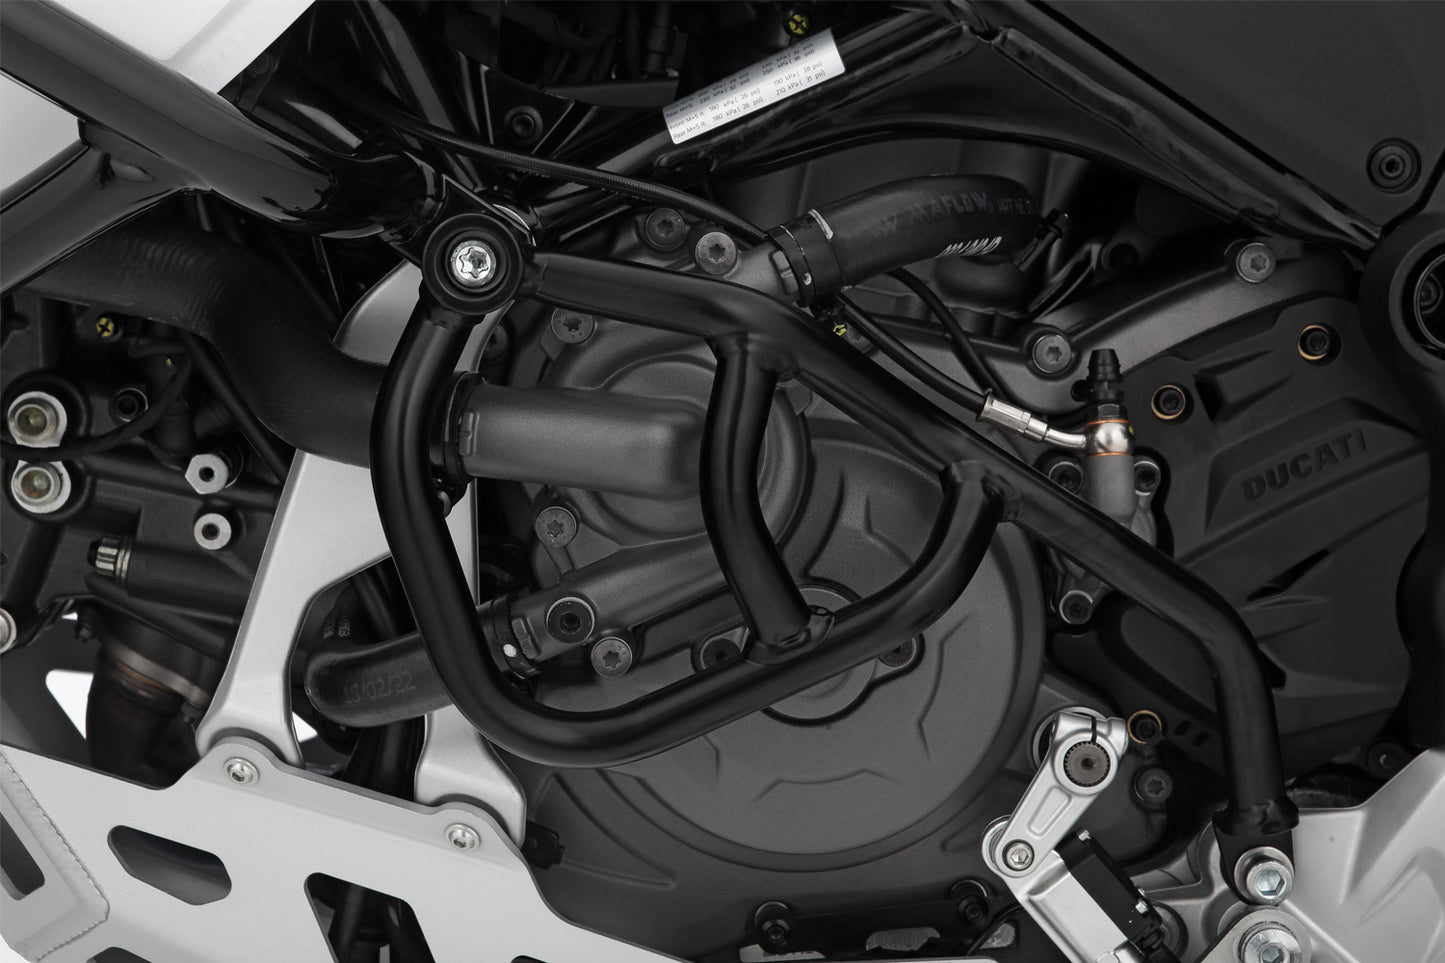 Wunderlich engine protection bar left - black - for installation without the fairing protection ba